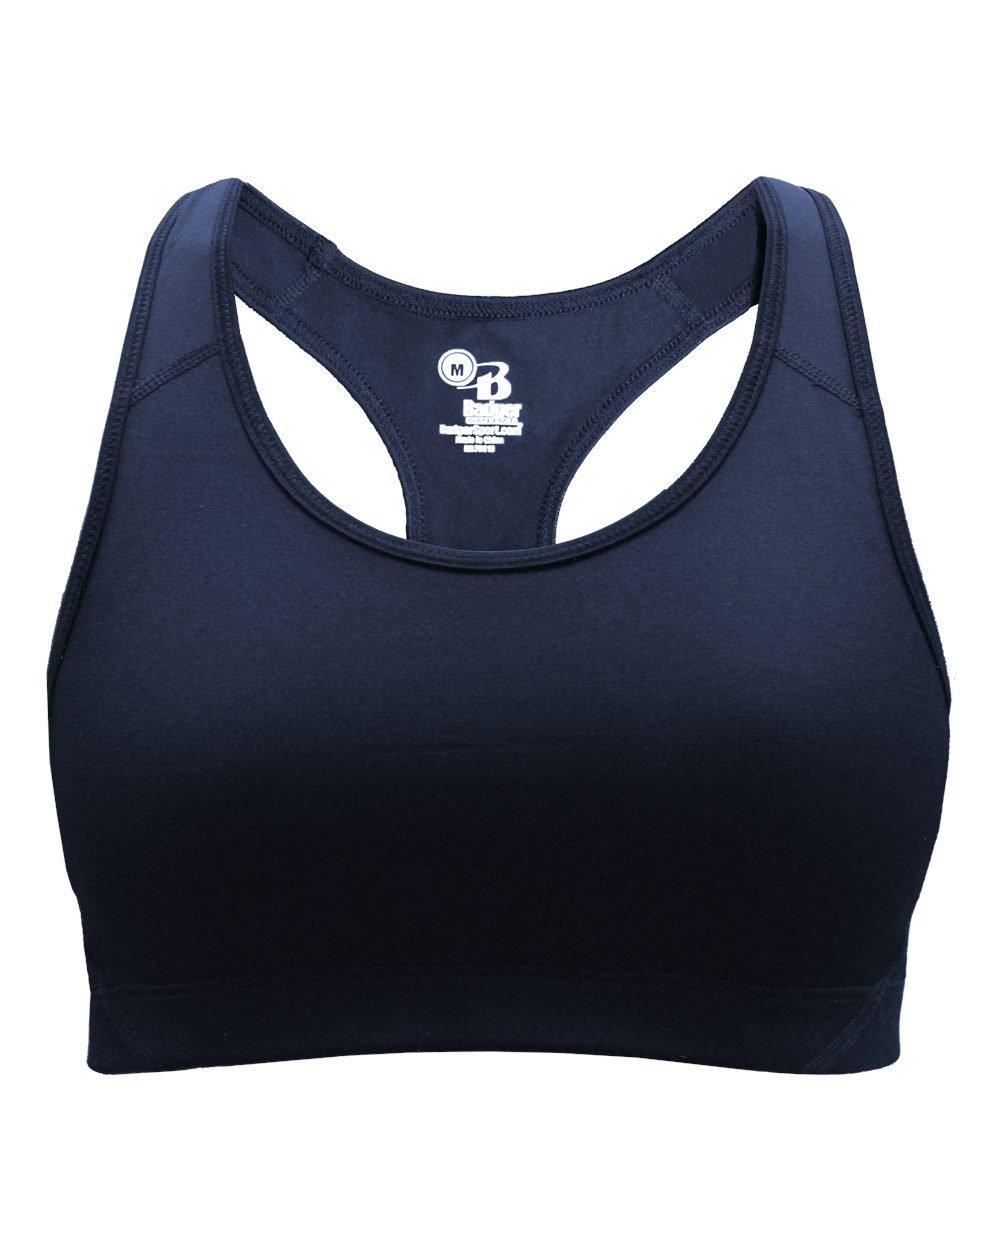 Sports Performance Girls & Womens Bra Top Moisture Wicking Stretch Body  Fit, 7 Colors Navy Blue Girls Small